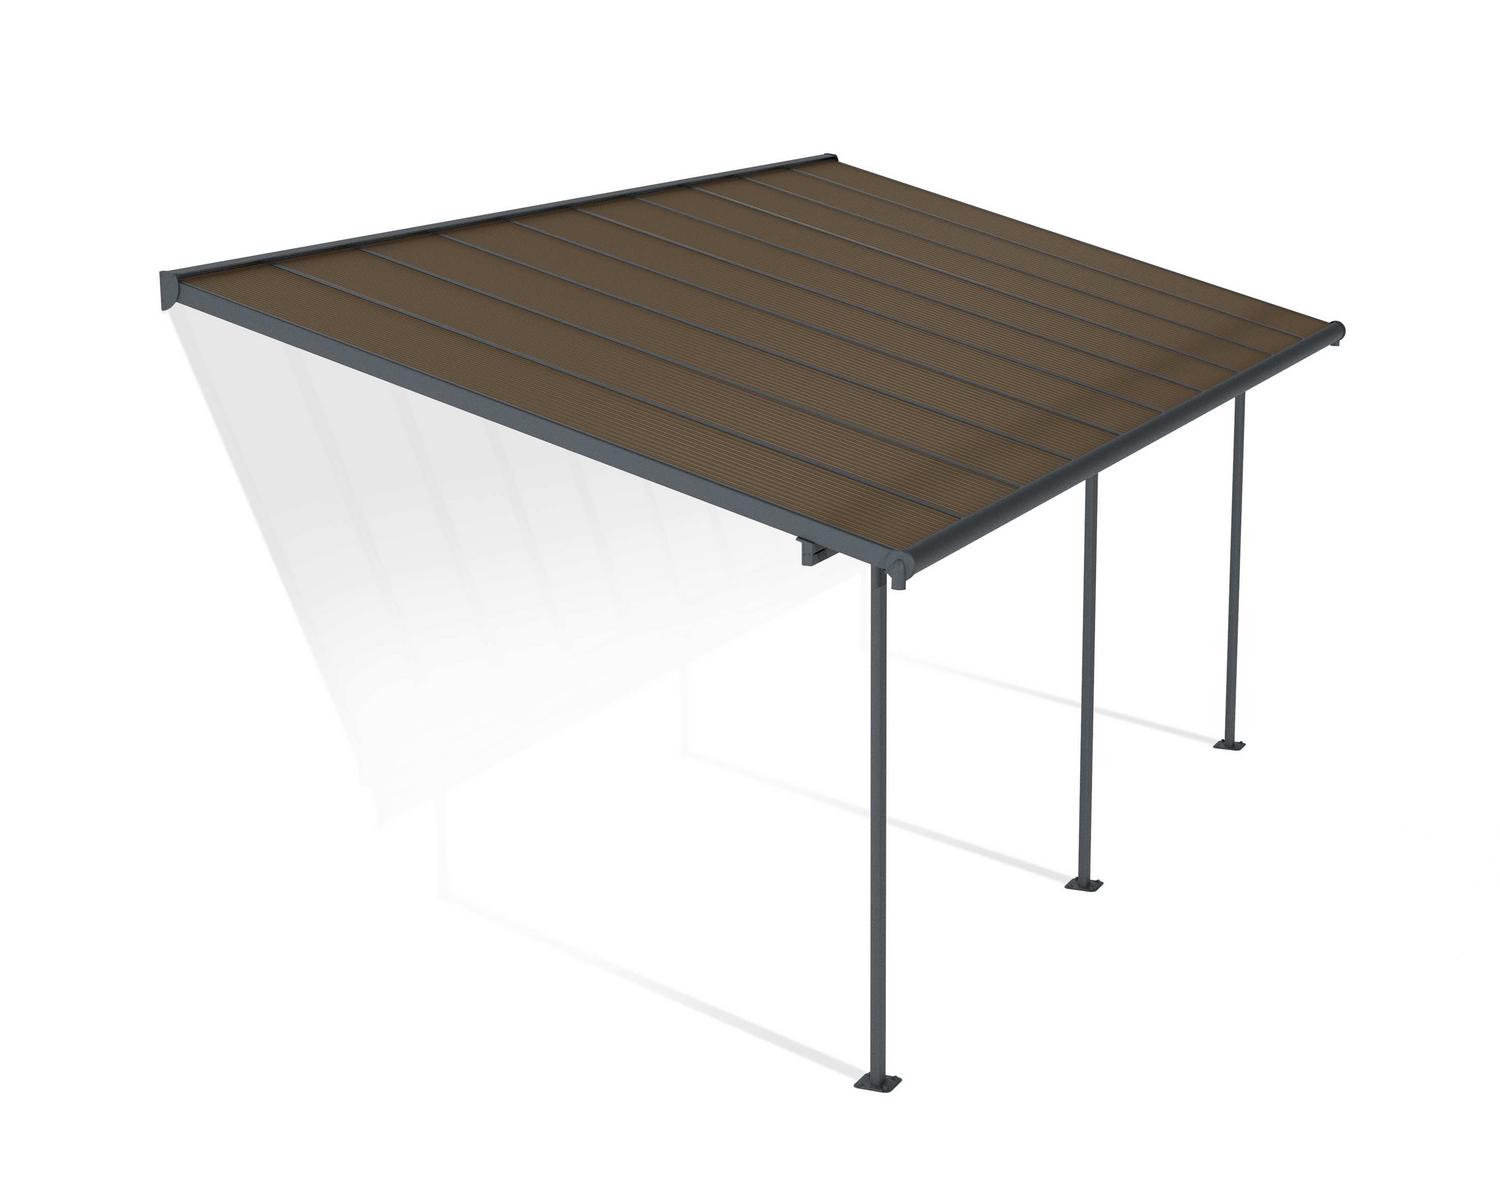 Capri 10 ft. x 20 ft. Grey Aluminium Patio Cover With 3 Posts, Bronze-tinted twin-wall polycarbonate roof panels.